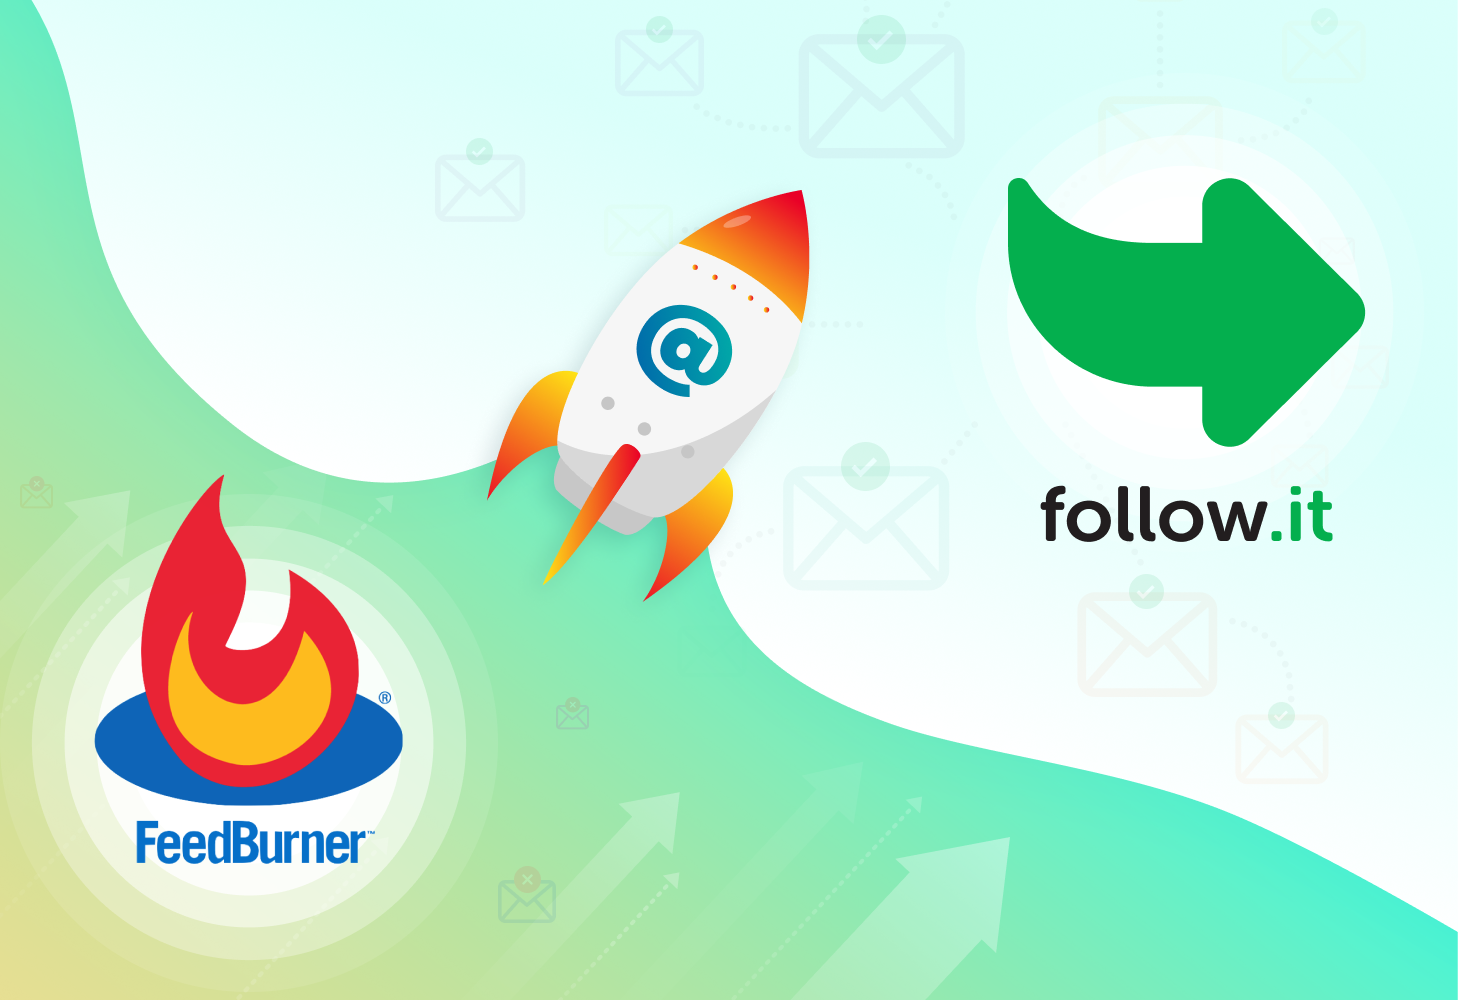 Feedburner Stops Email Services - Switch to Follow.it Now